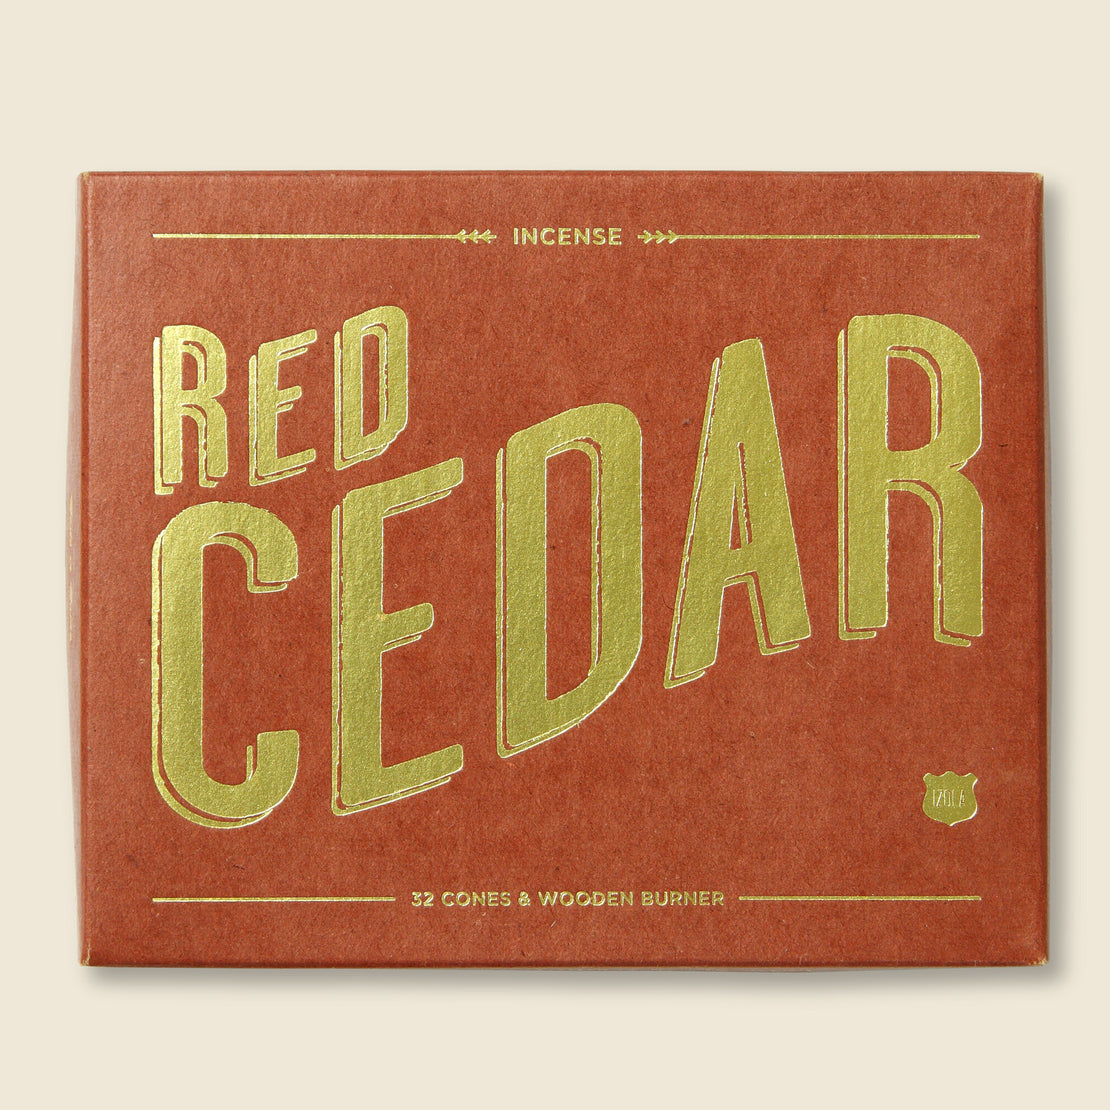 Incense - Red Cedar - Home - STAG Provisions - Home - Fragrance - Incense